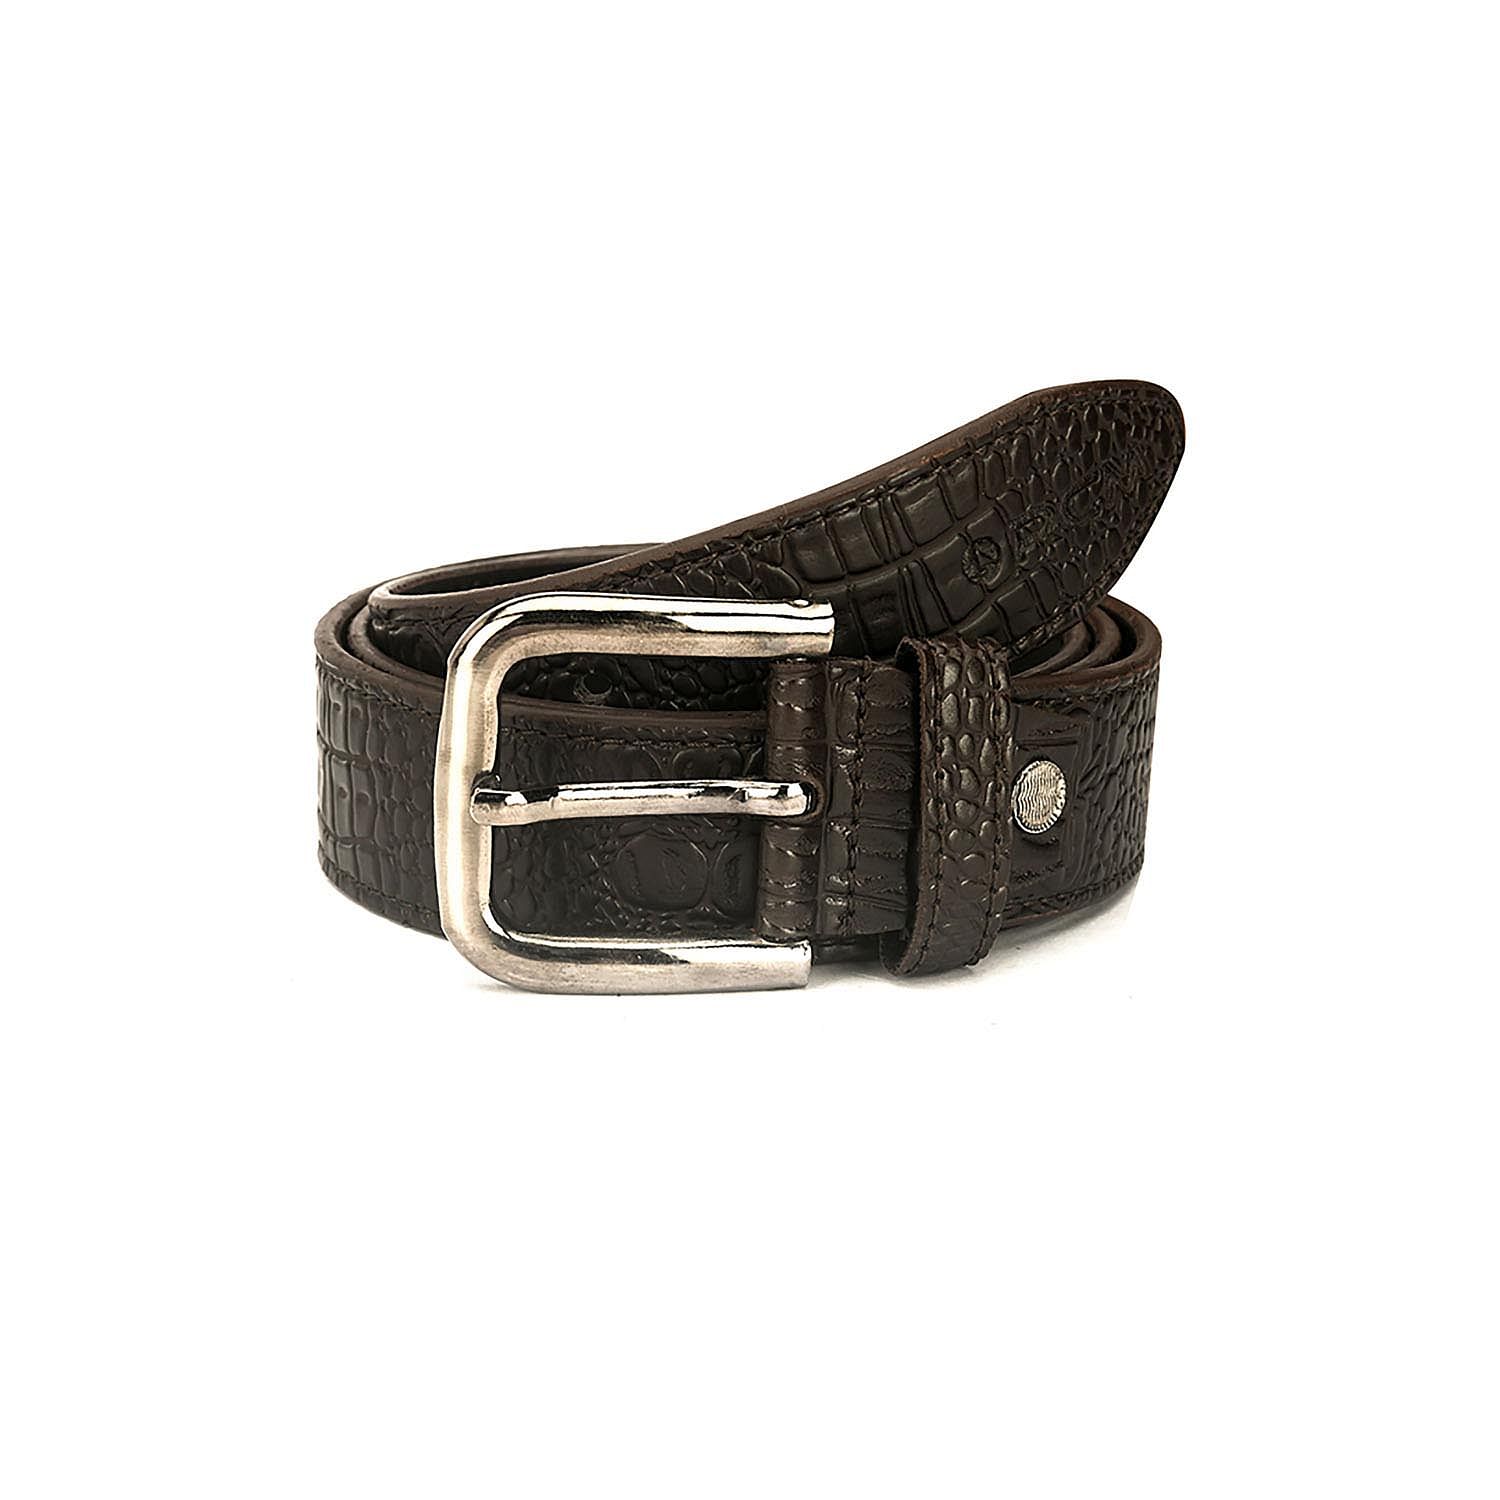 Men's Casual Textured Perforated Belt - BRN - LZ- CB-101